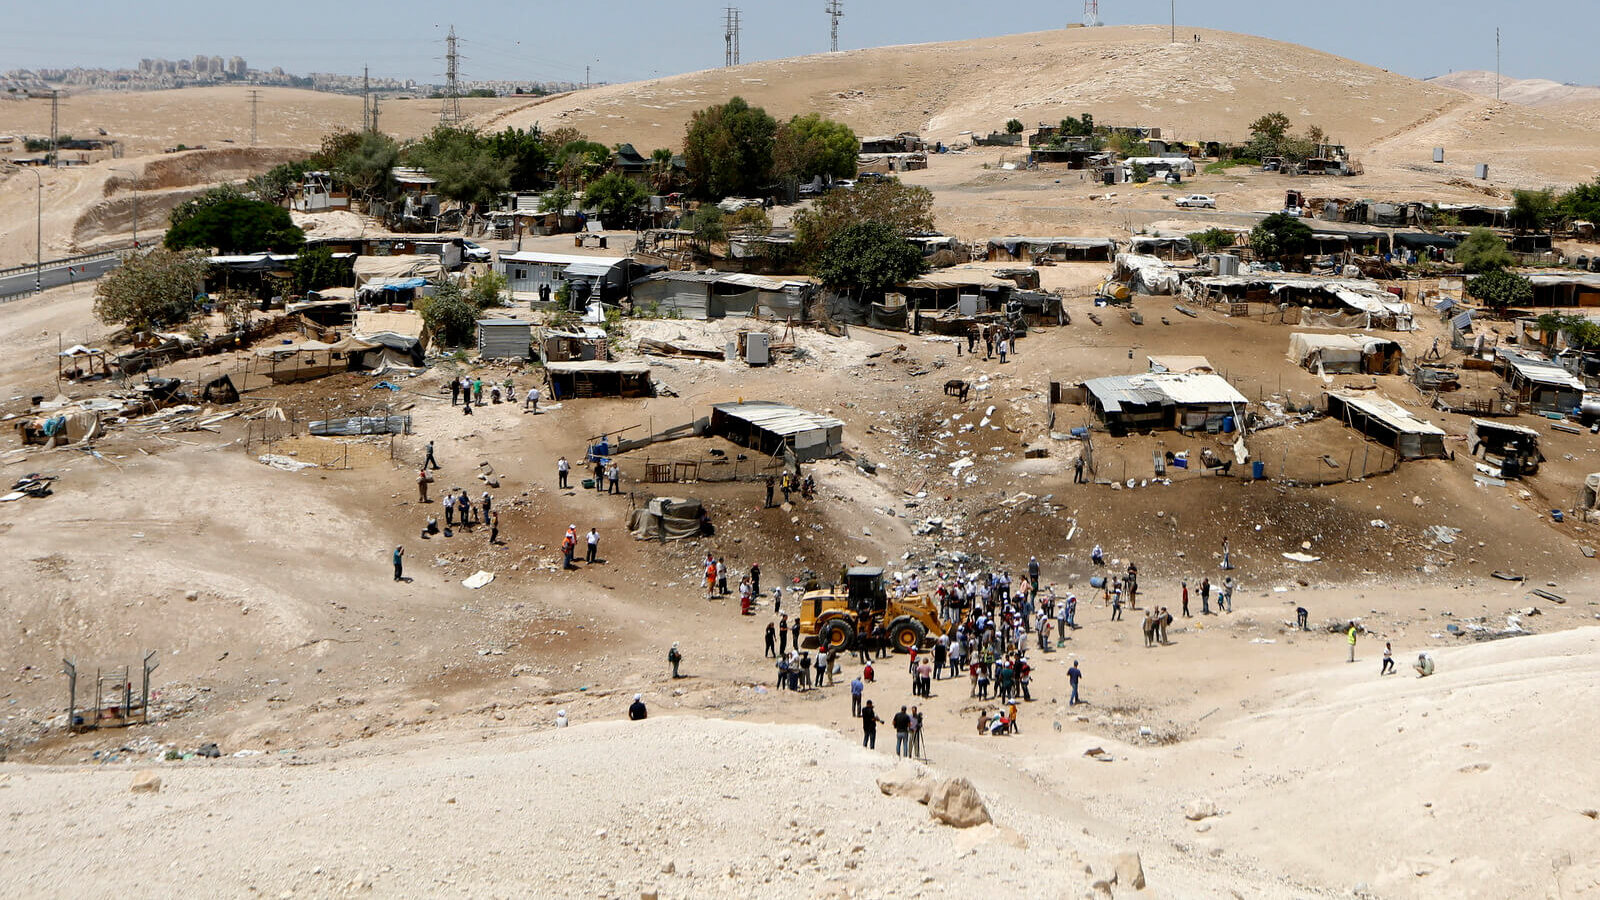 Protesters surround a bulldozer in the Palestinian village of Khan al-Ahmar, July 4, 2018. Israeli police scuffled with with people protesting the demolition of the village which is Israel says is illegal due to a lack of building permits, despite being on Palestinian land in the West Bank. Majdi Mohammed | AP